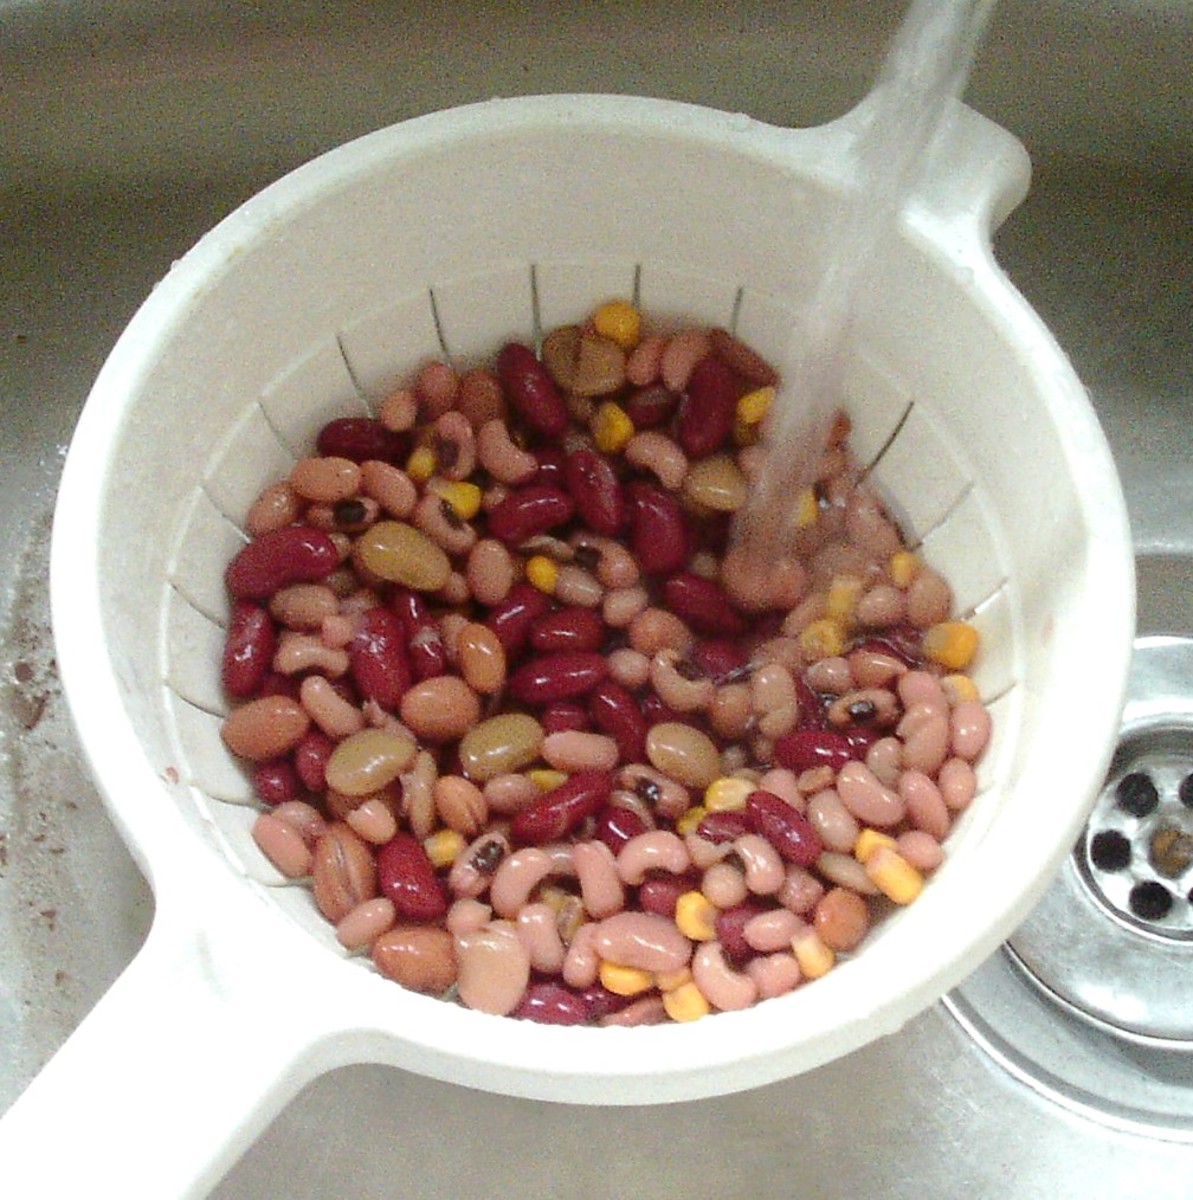 Rinse beans under cold running water